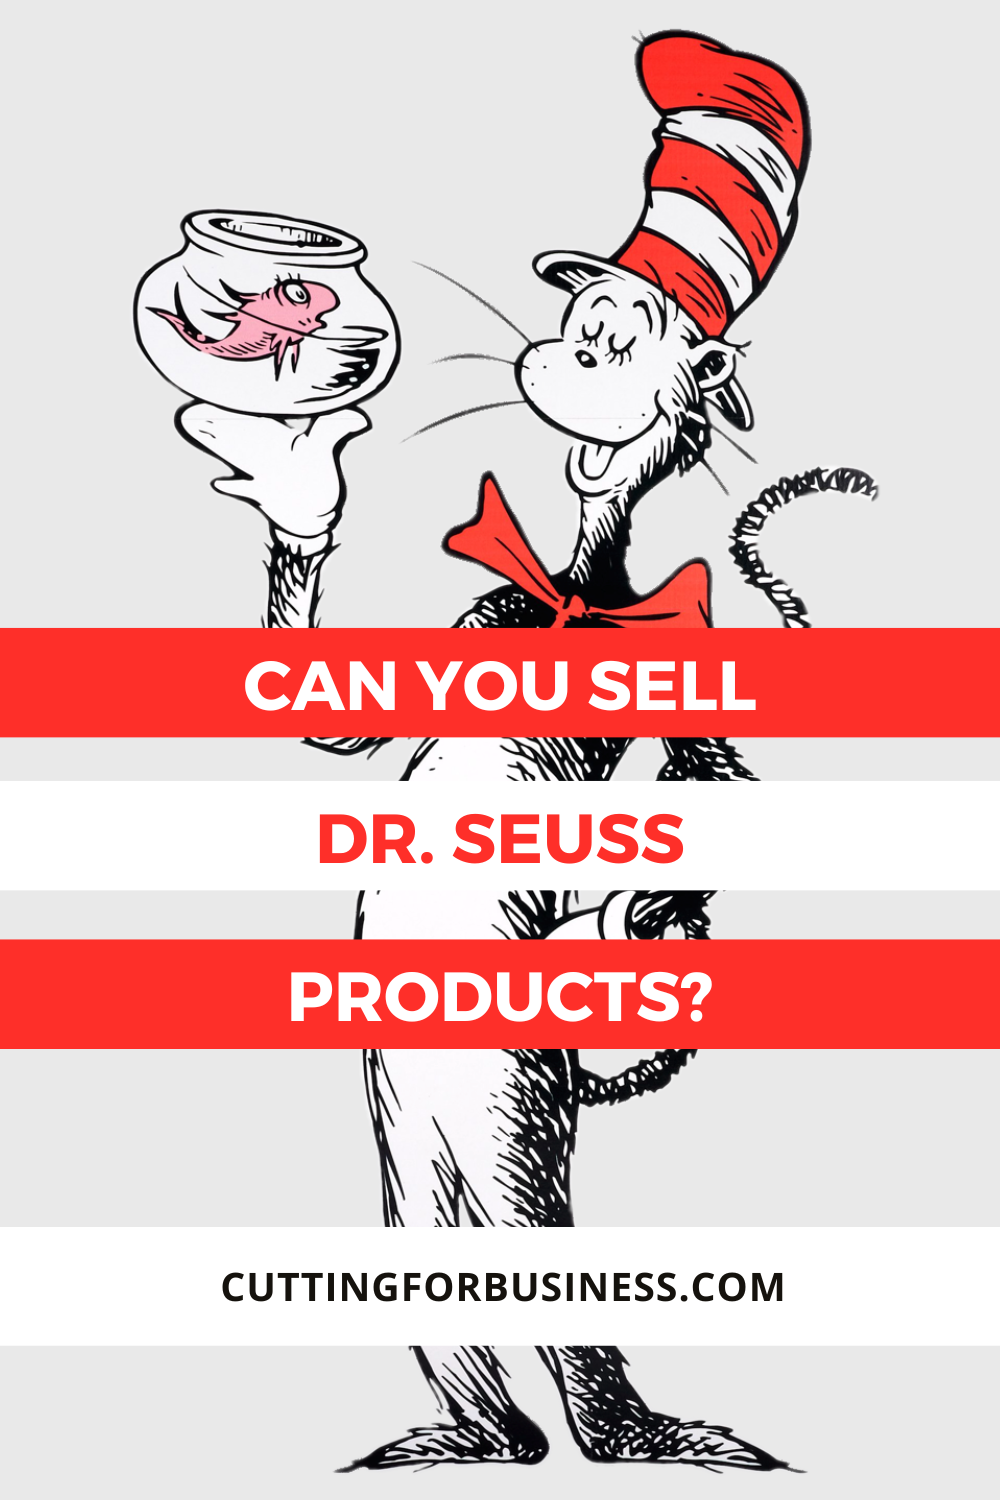 Can You Make and Sell Dr. Seuss Products - cuttingforbusiness.com